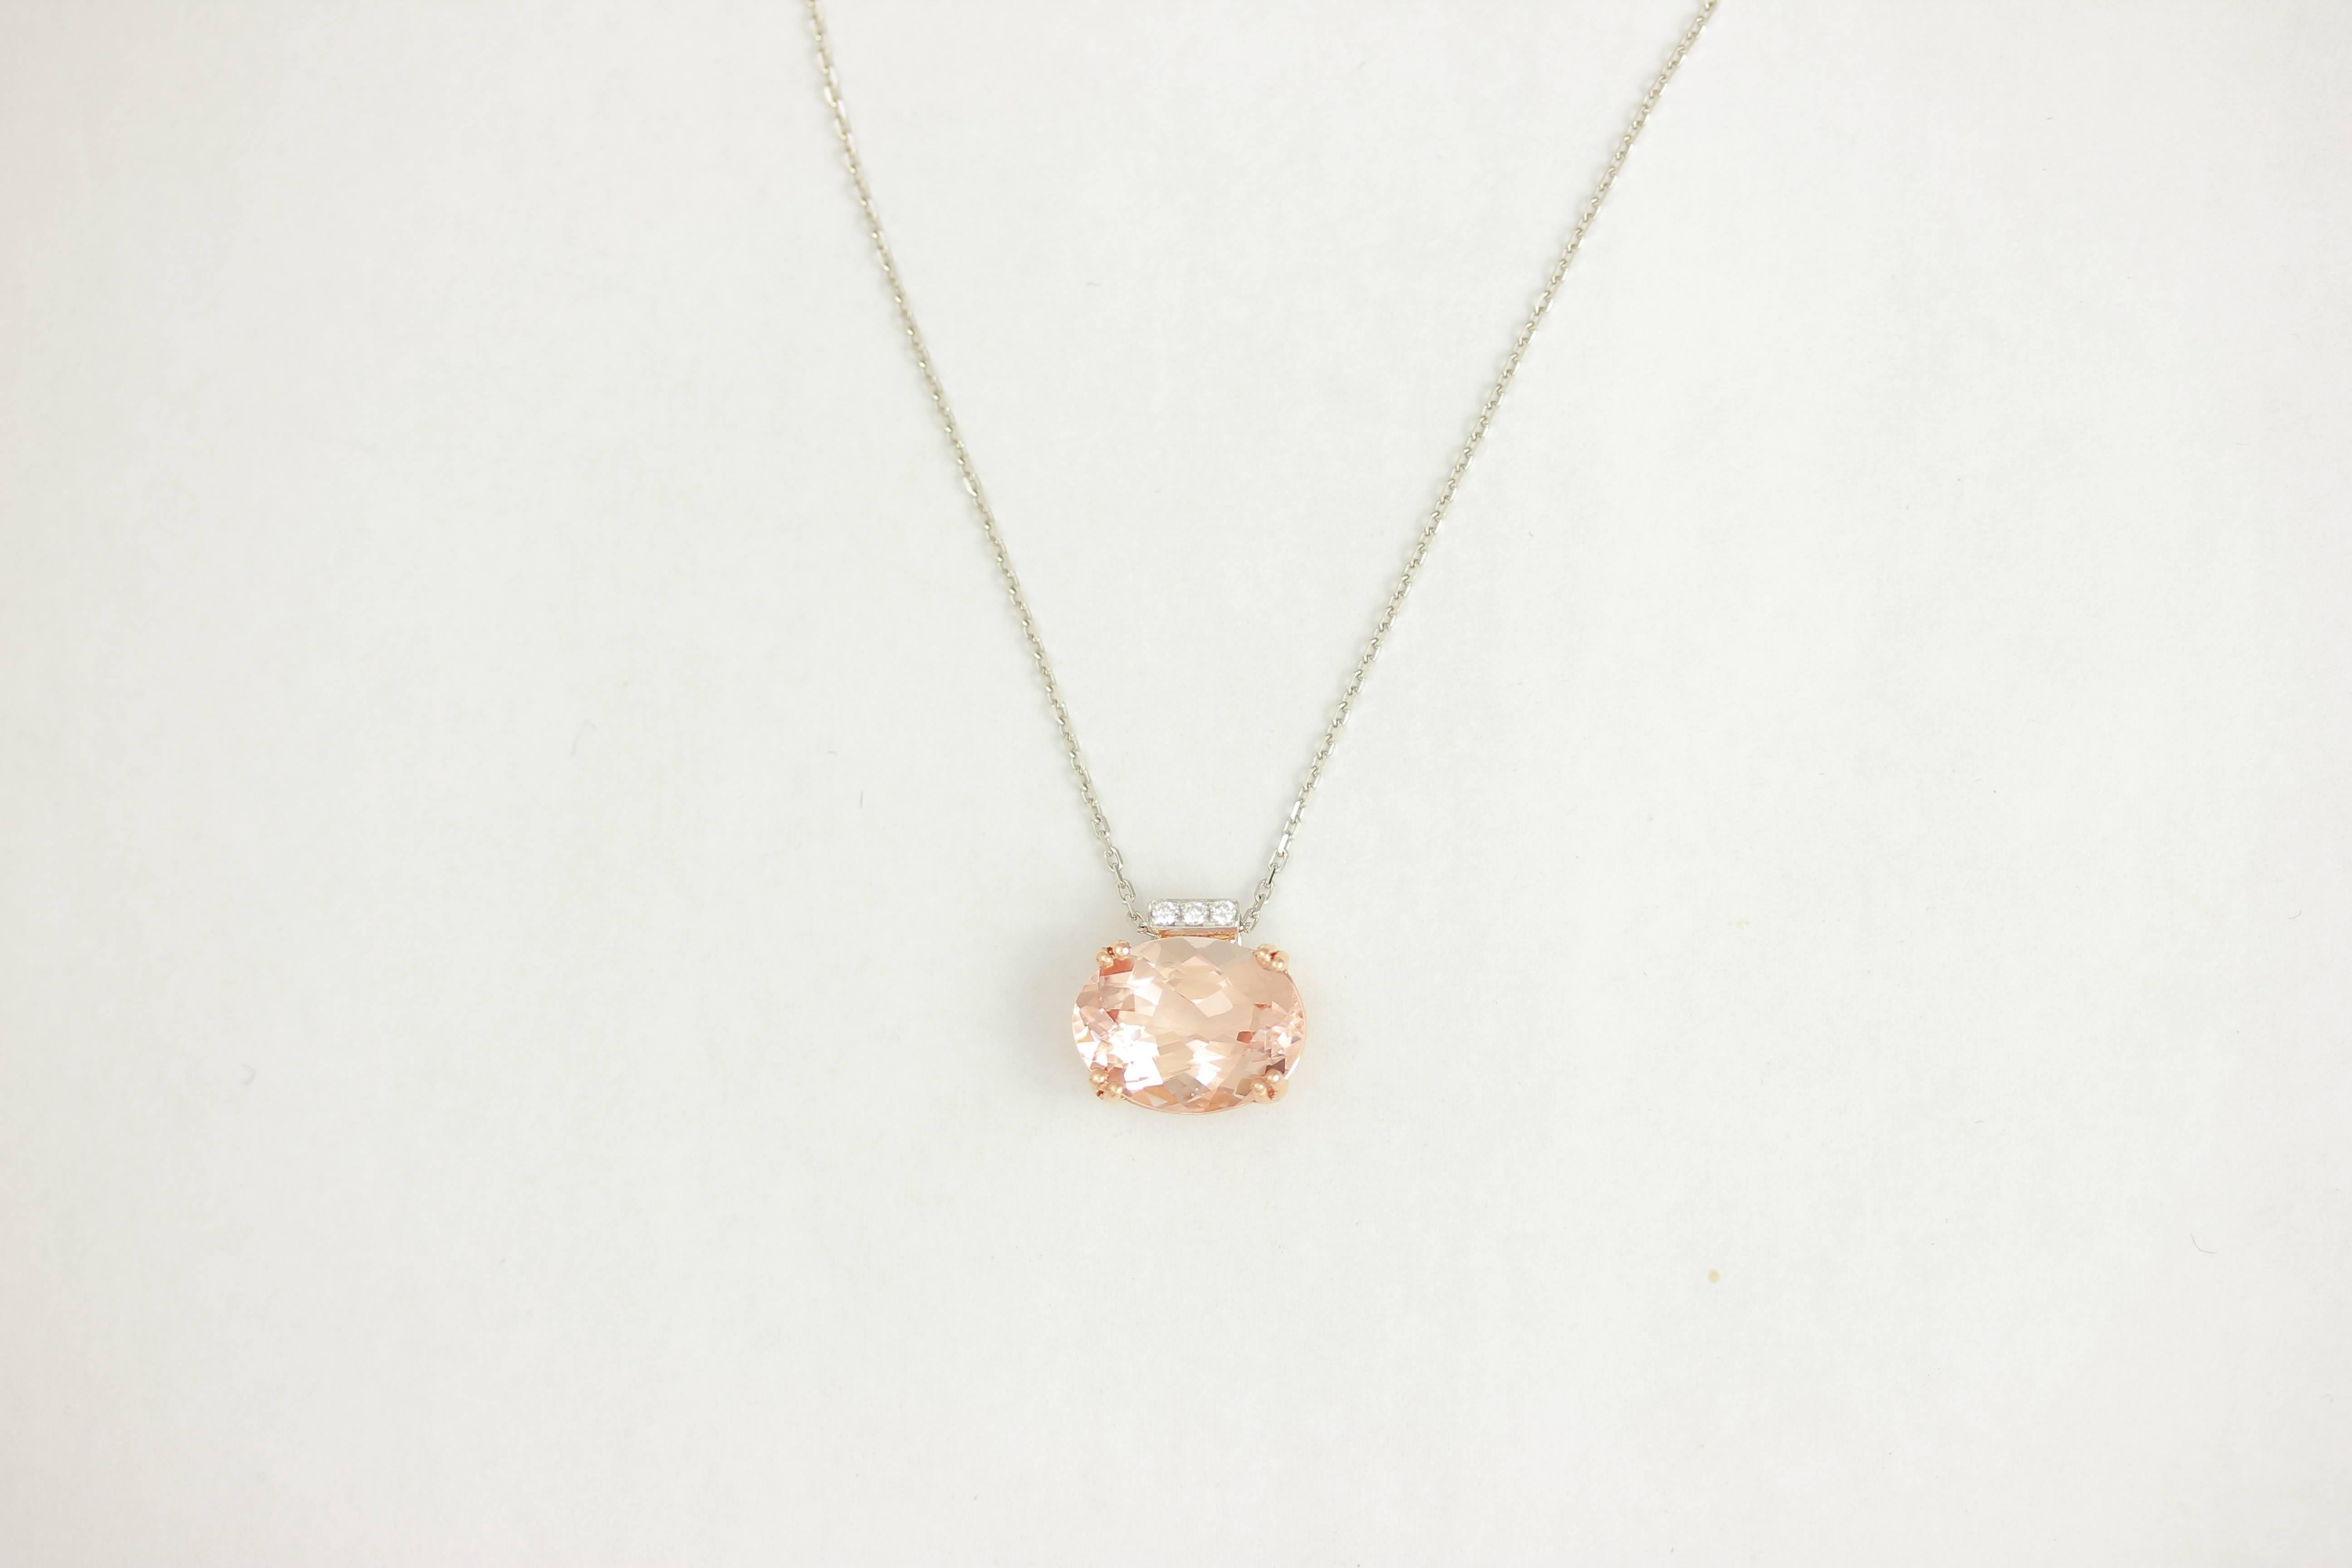 18K WPG HORIZONTAL OVAL MORGANITE WITH PG BASKET AND WG DIAMOND BALE PENDANT WITH WG CHAIN, MORG 4.07 Carats, 3 DIA 0.03 Carats